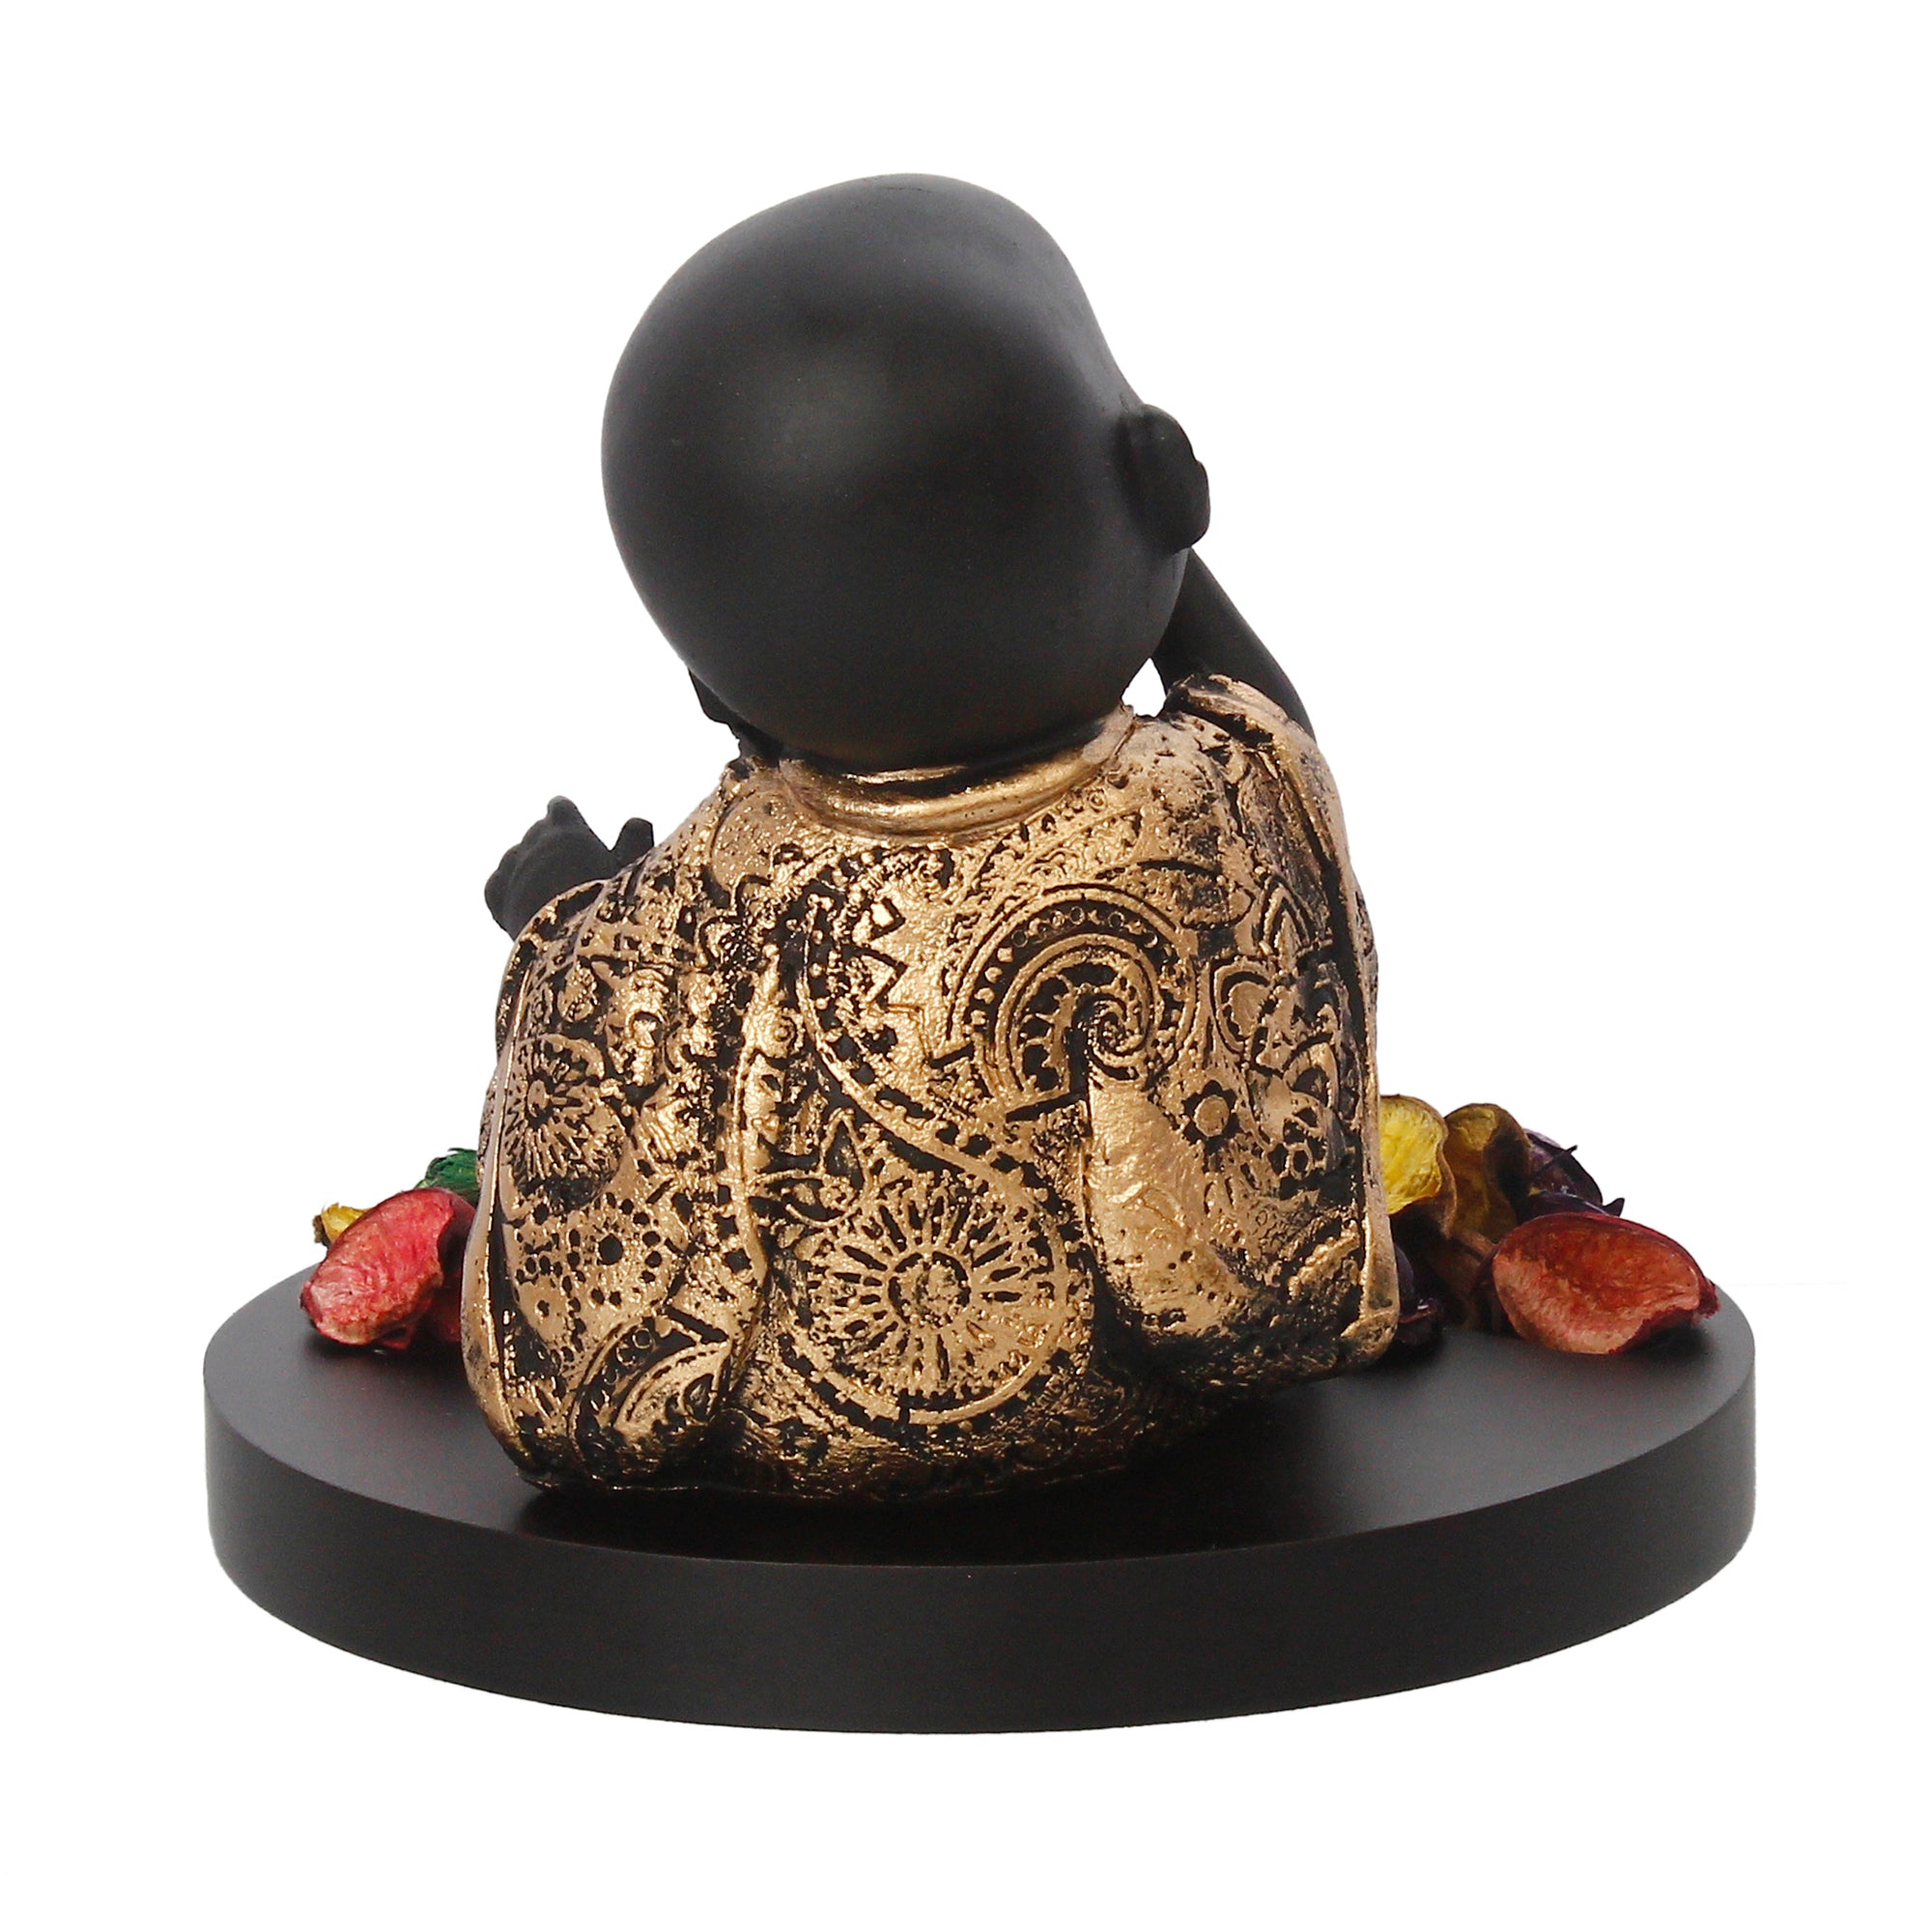 Decorative Smiling Golden Monk Buddha with Wooden Base, Fragranced Petals and Tealight 6